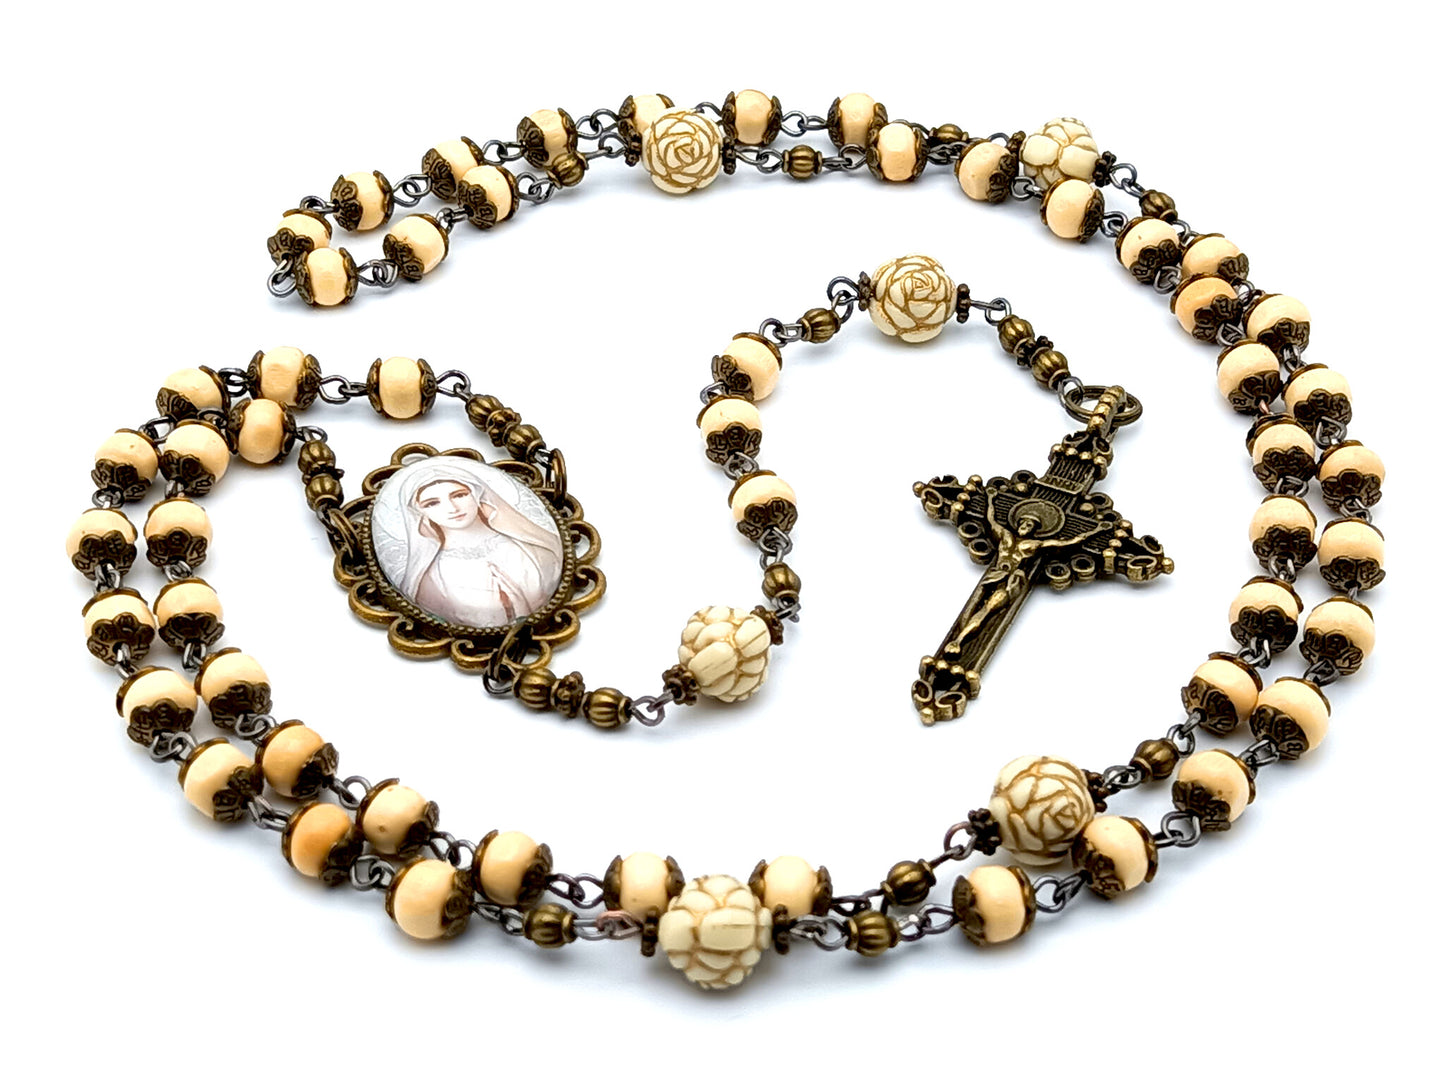 Vintage style Virgin Mary unique rosary beads with wooden and rose beads and filigree brass crucifix.